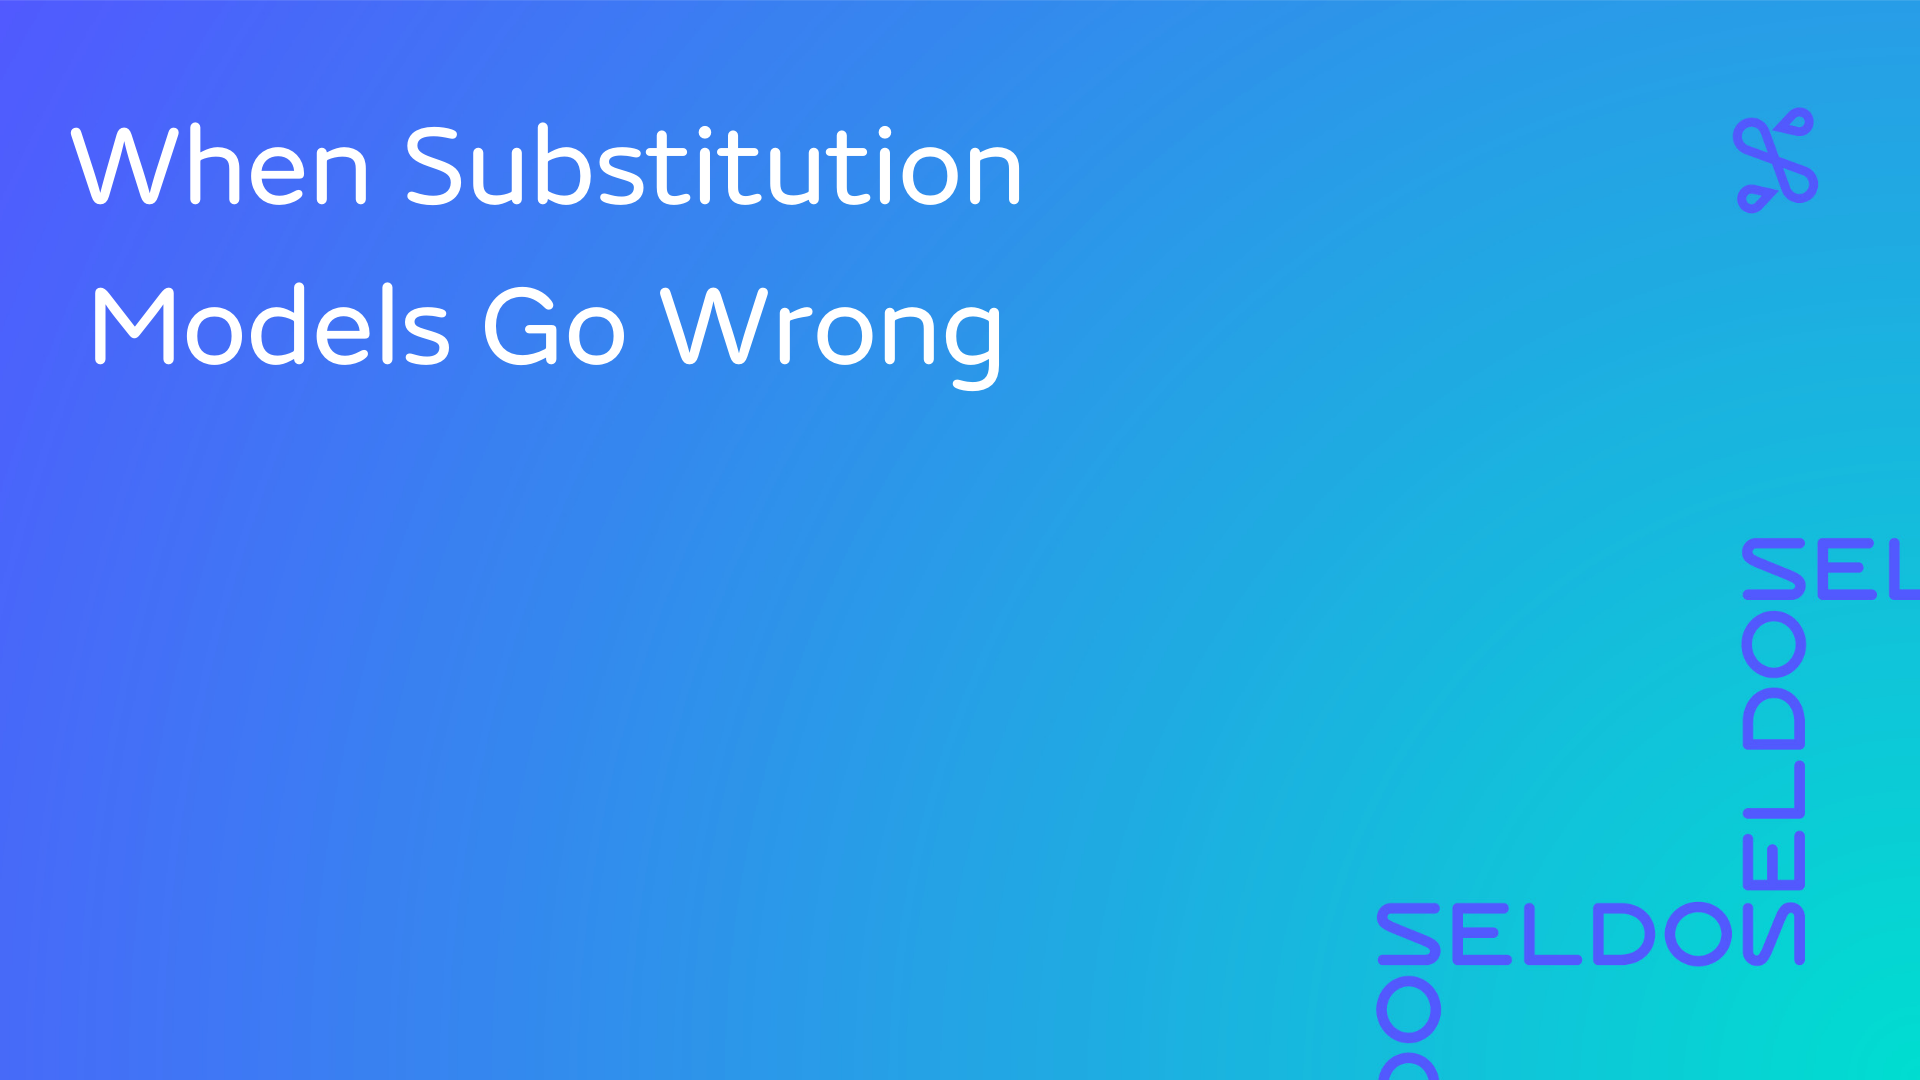 When Substitution Models Go Wrong